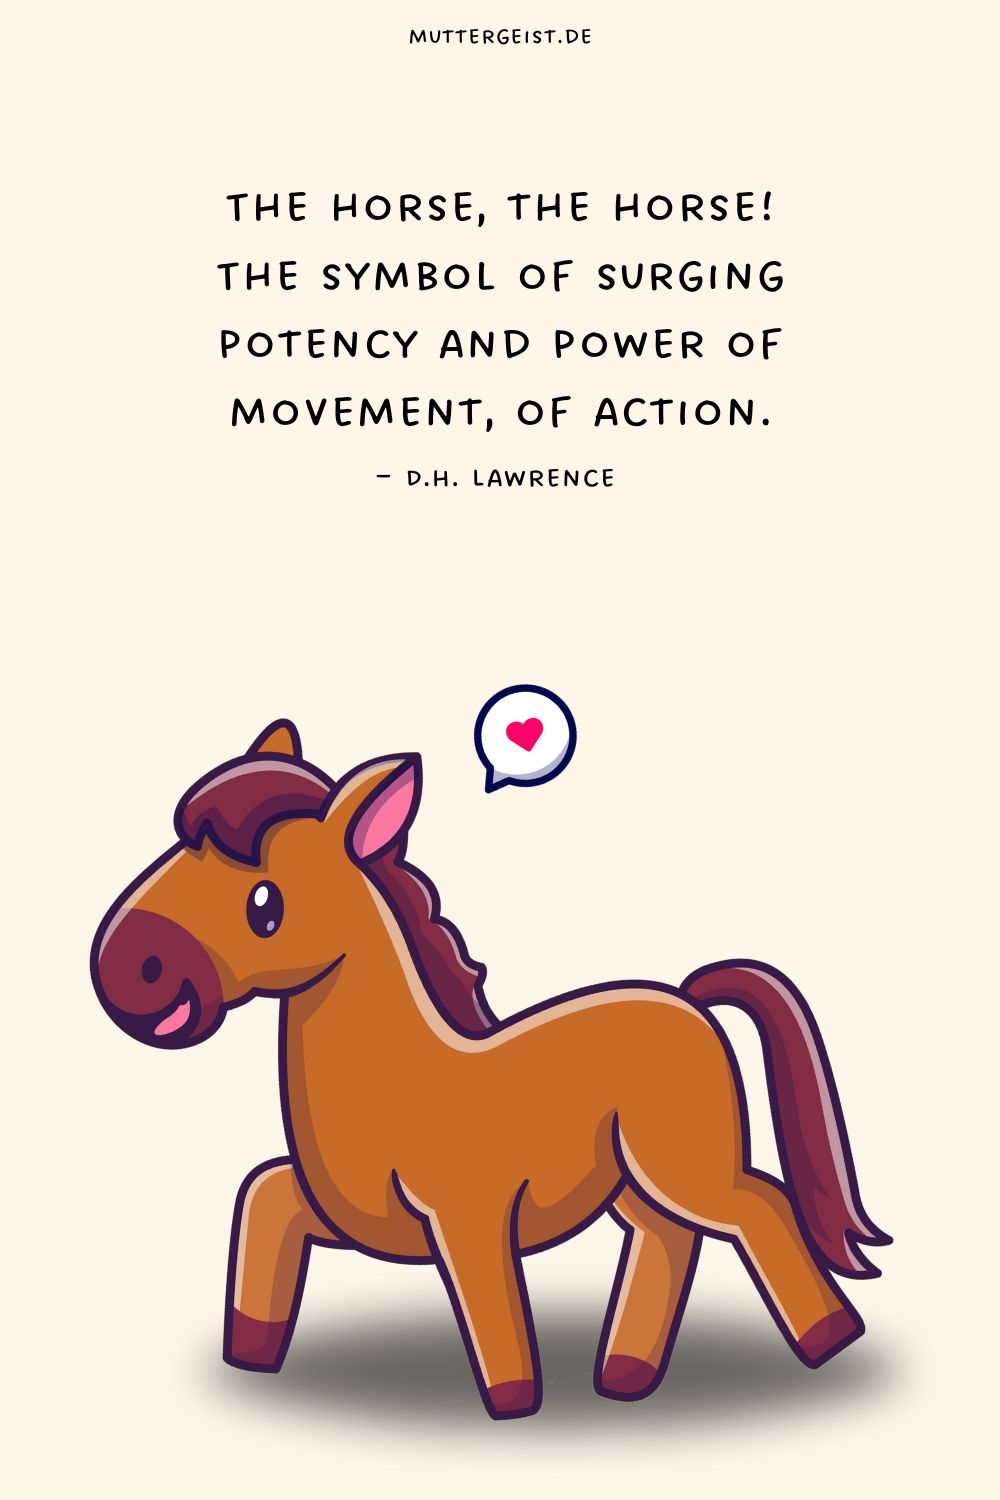 The horse, the horse! The symbol of surging potency and power of movement, of action